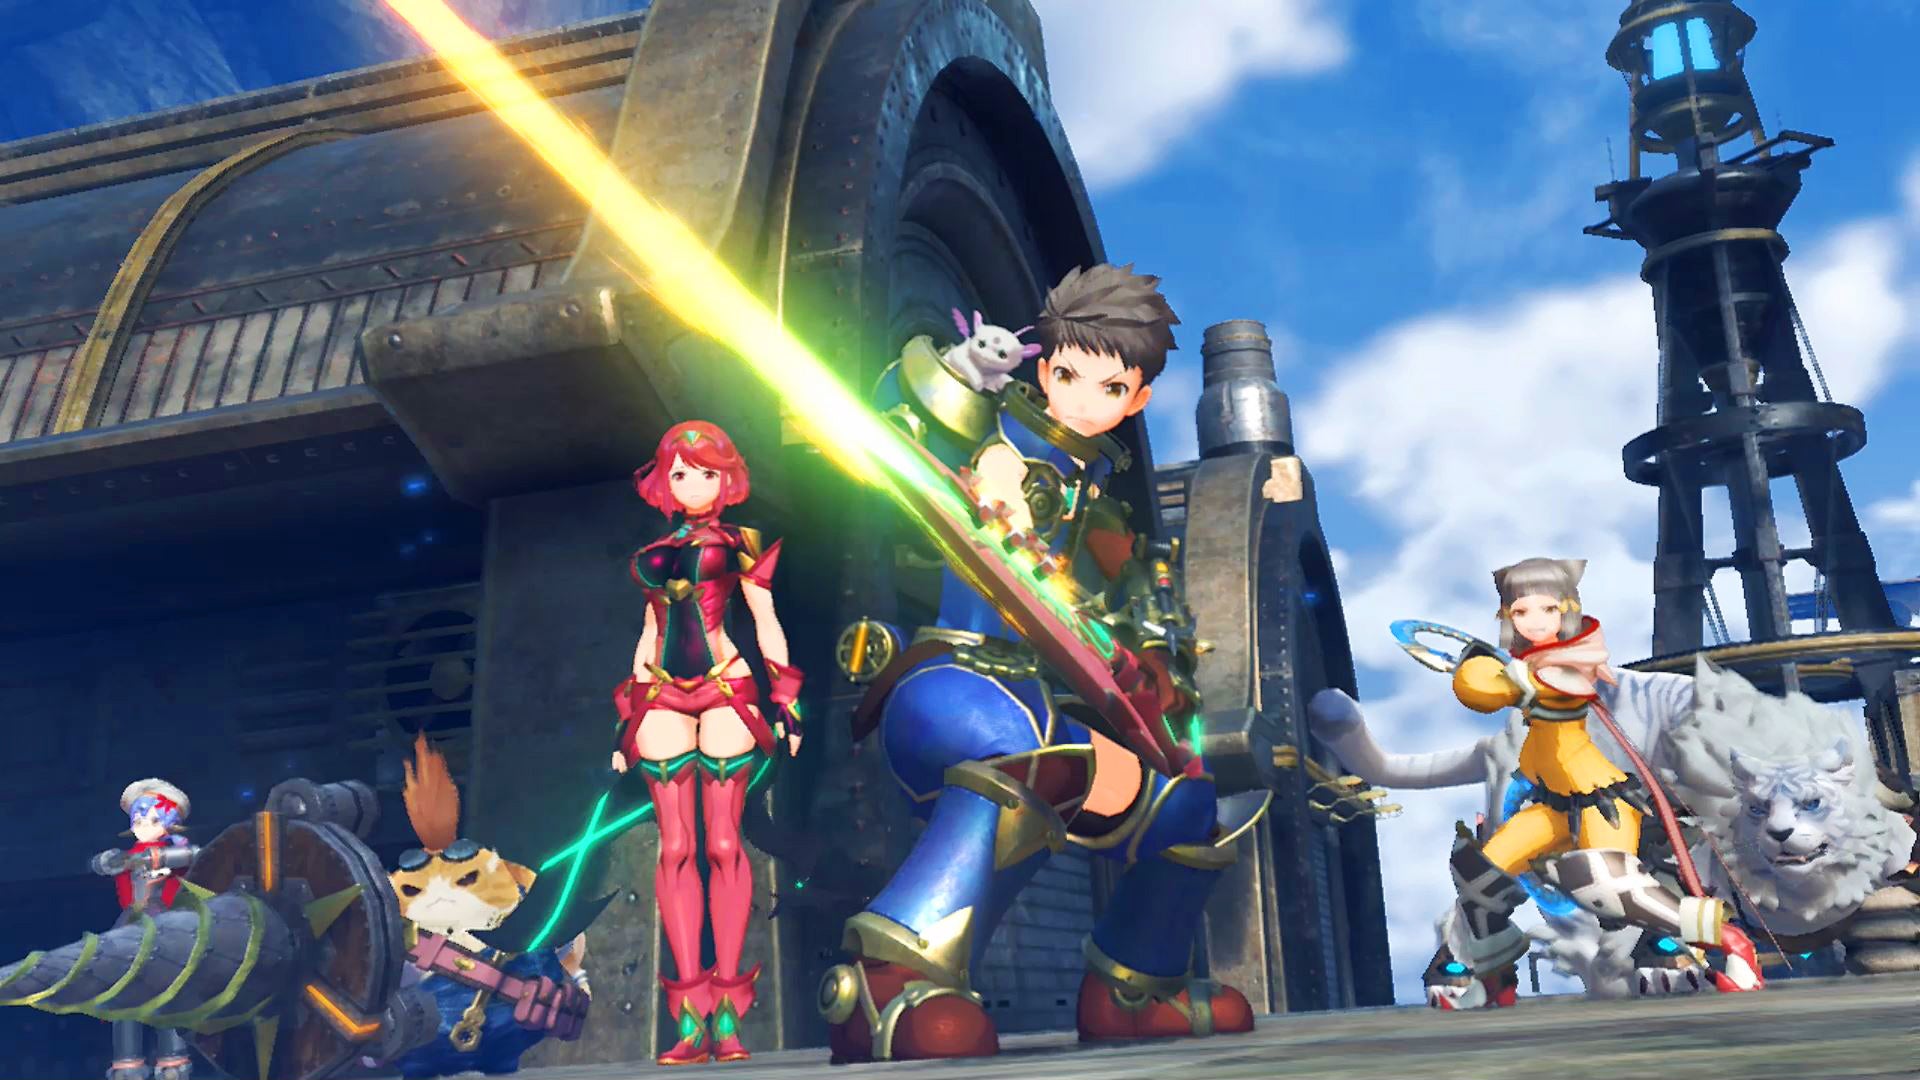 Image for Xenoblade Chronicles 2 Guide - Tips and Tricks, Beginner's Guide, Collection Points, Heart-to-Heart Guide